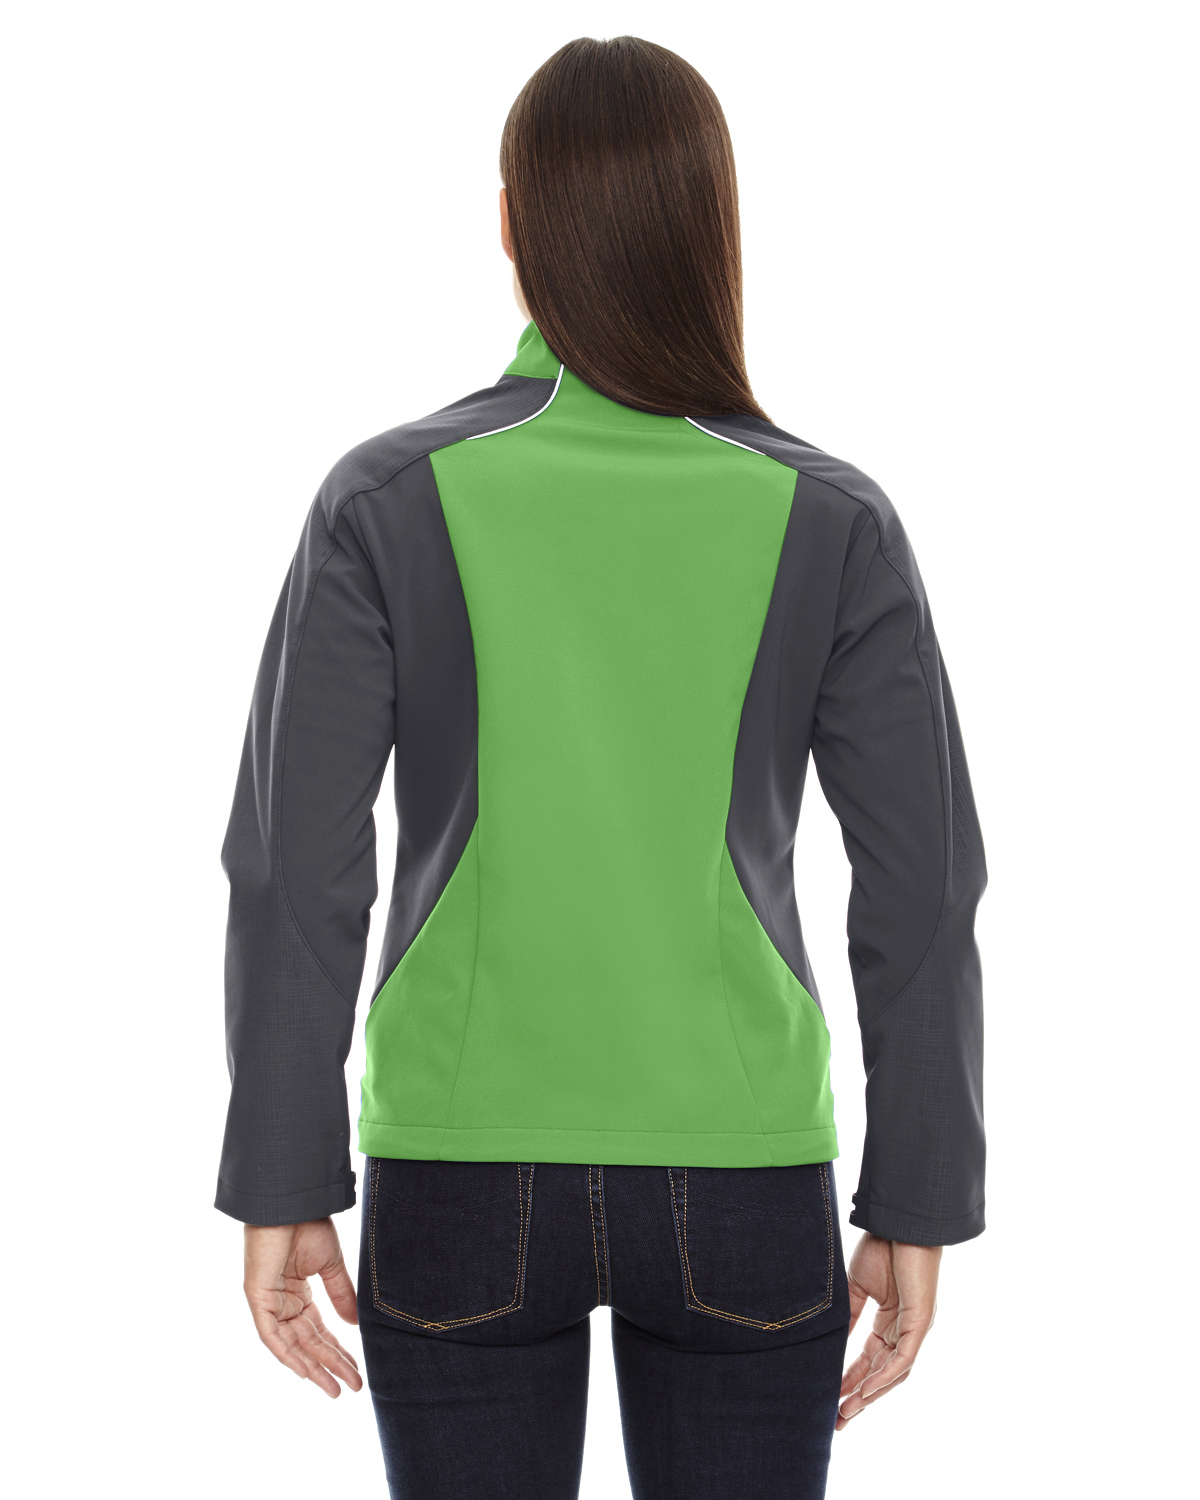 The Ash City - North End Ladies' Terrain Colorblock Soft Shell with Embossed Print - VALLEY GREEN 448 - S - image 2 of 2